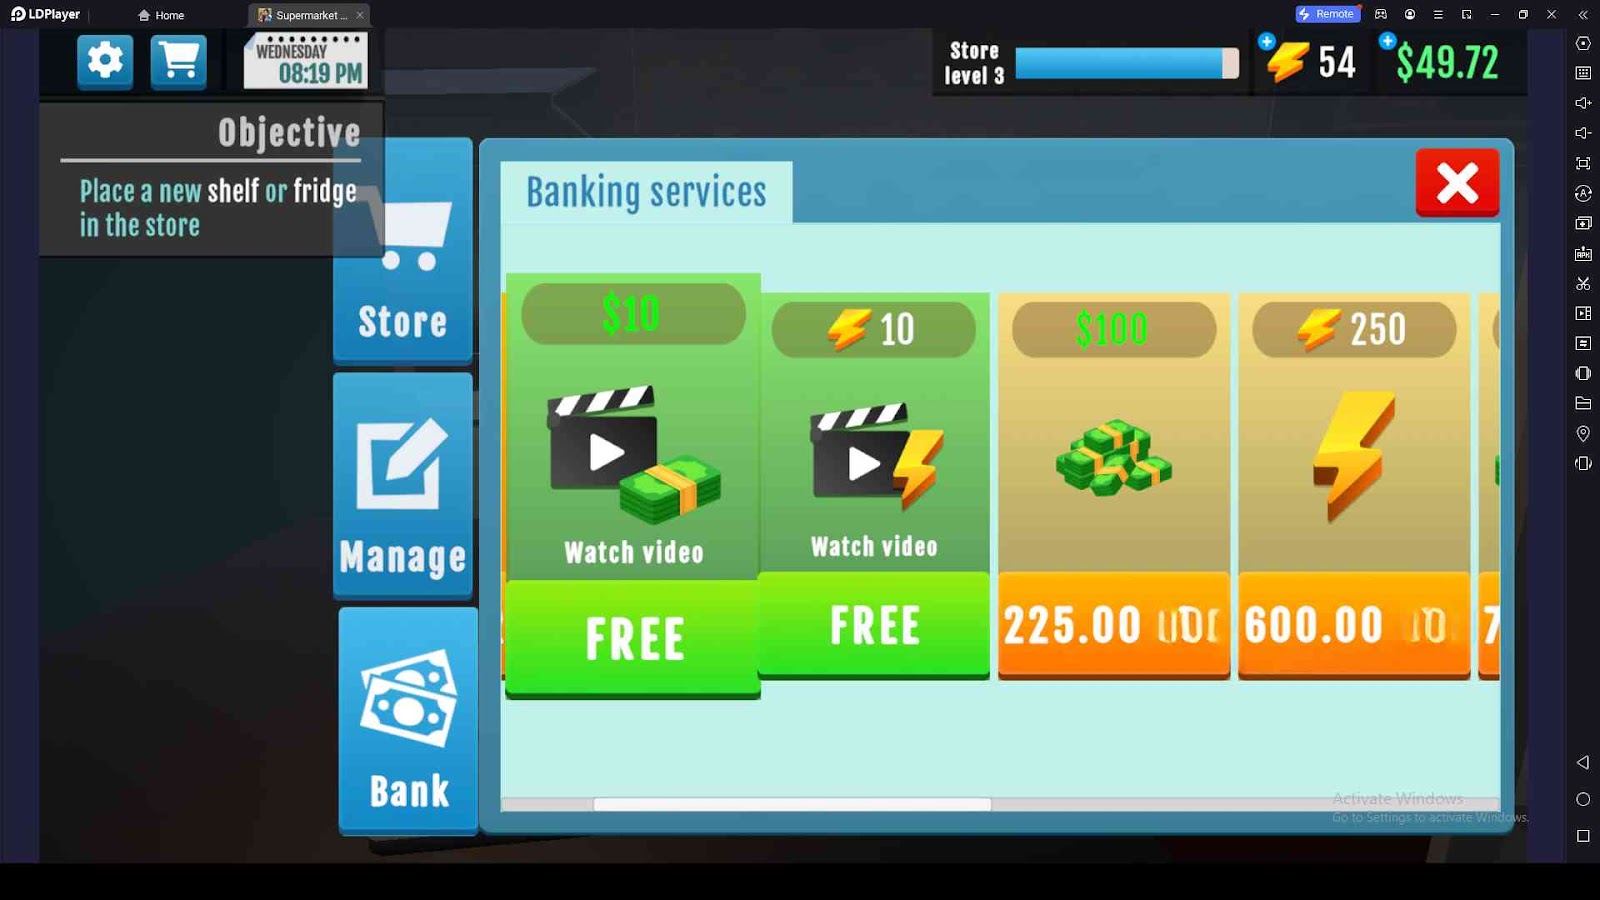 Watch Ads for More Money in Supermarket Manager Simulator